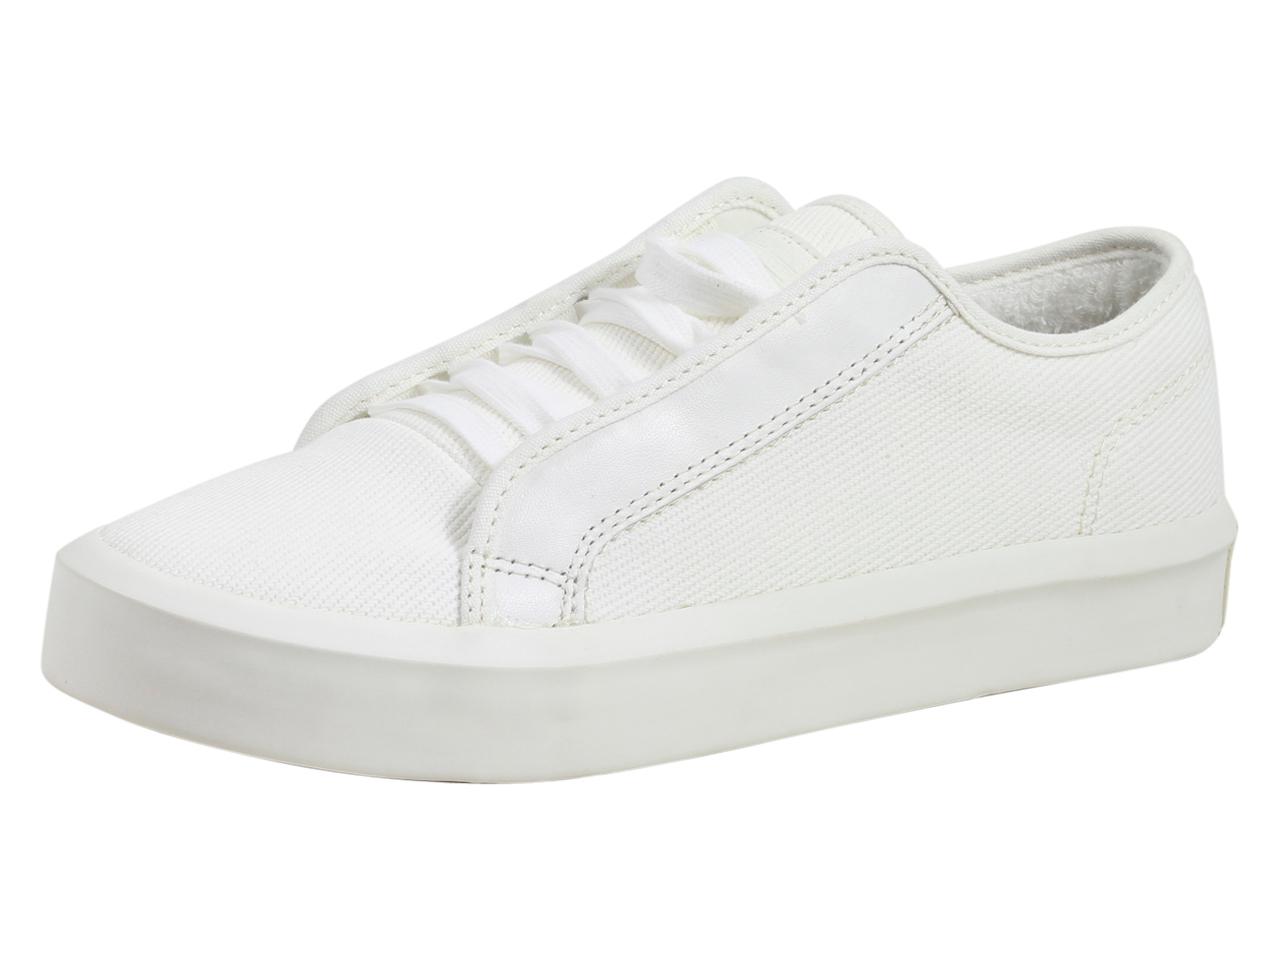 g star raw white sneakers